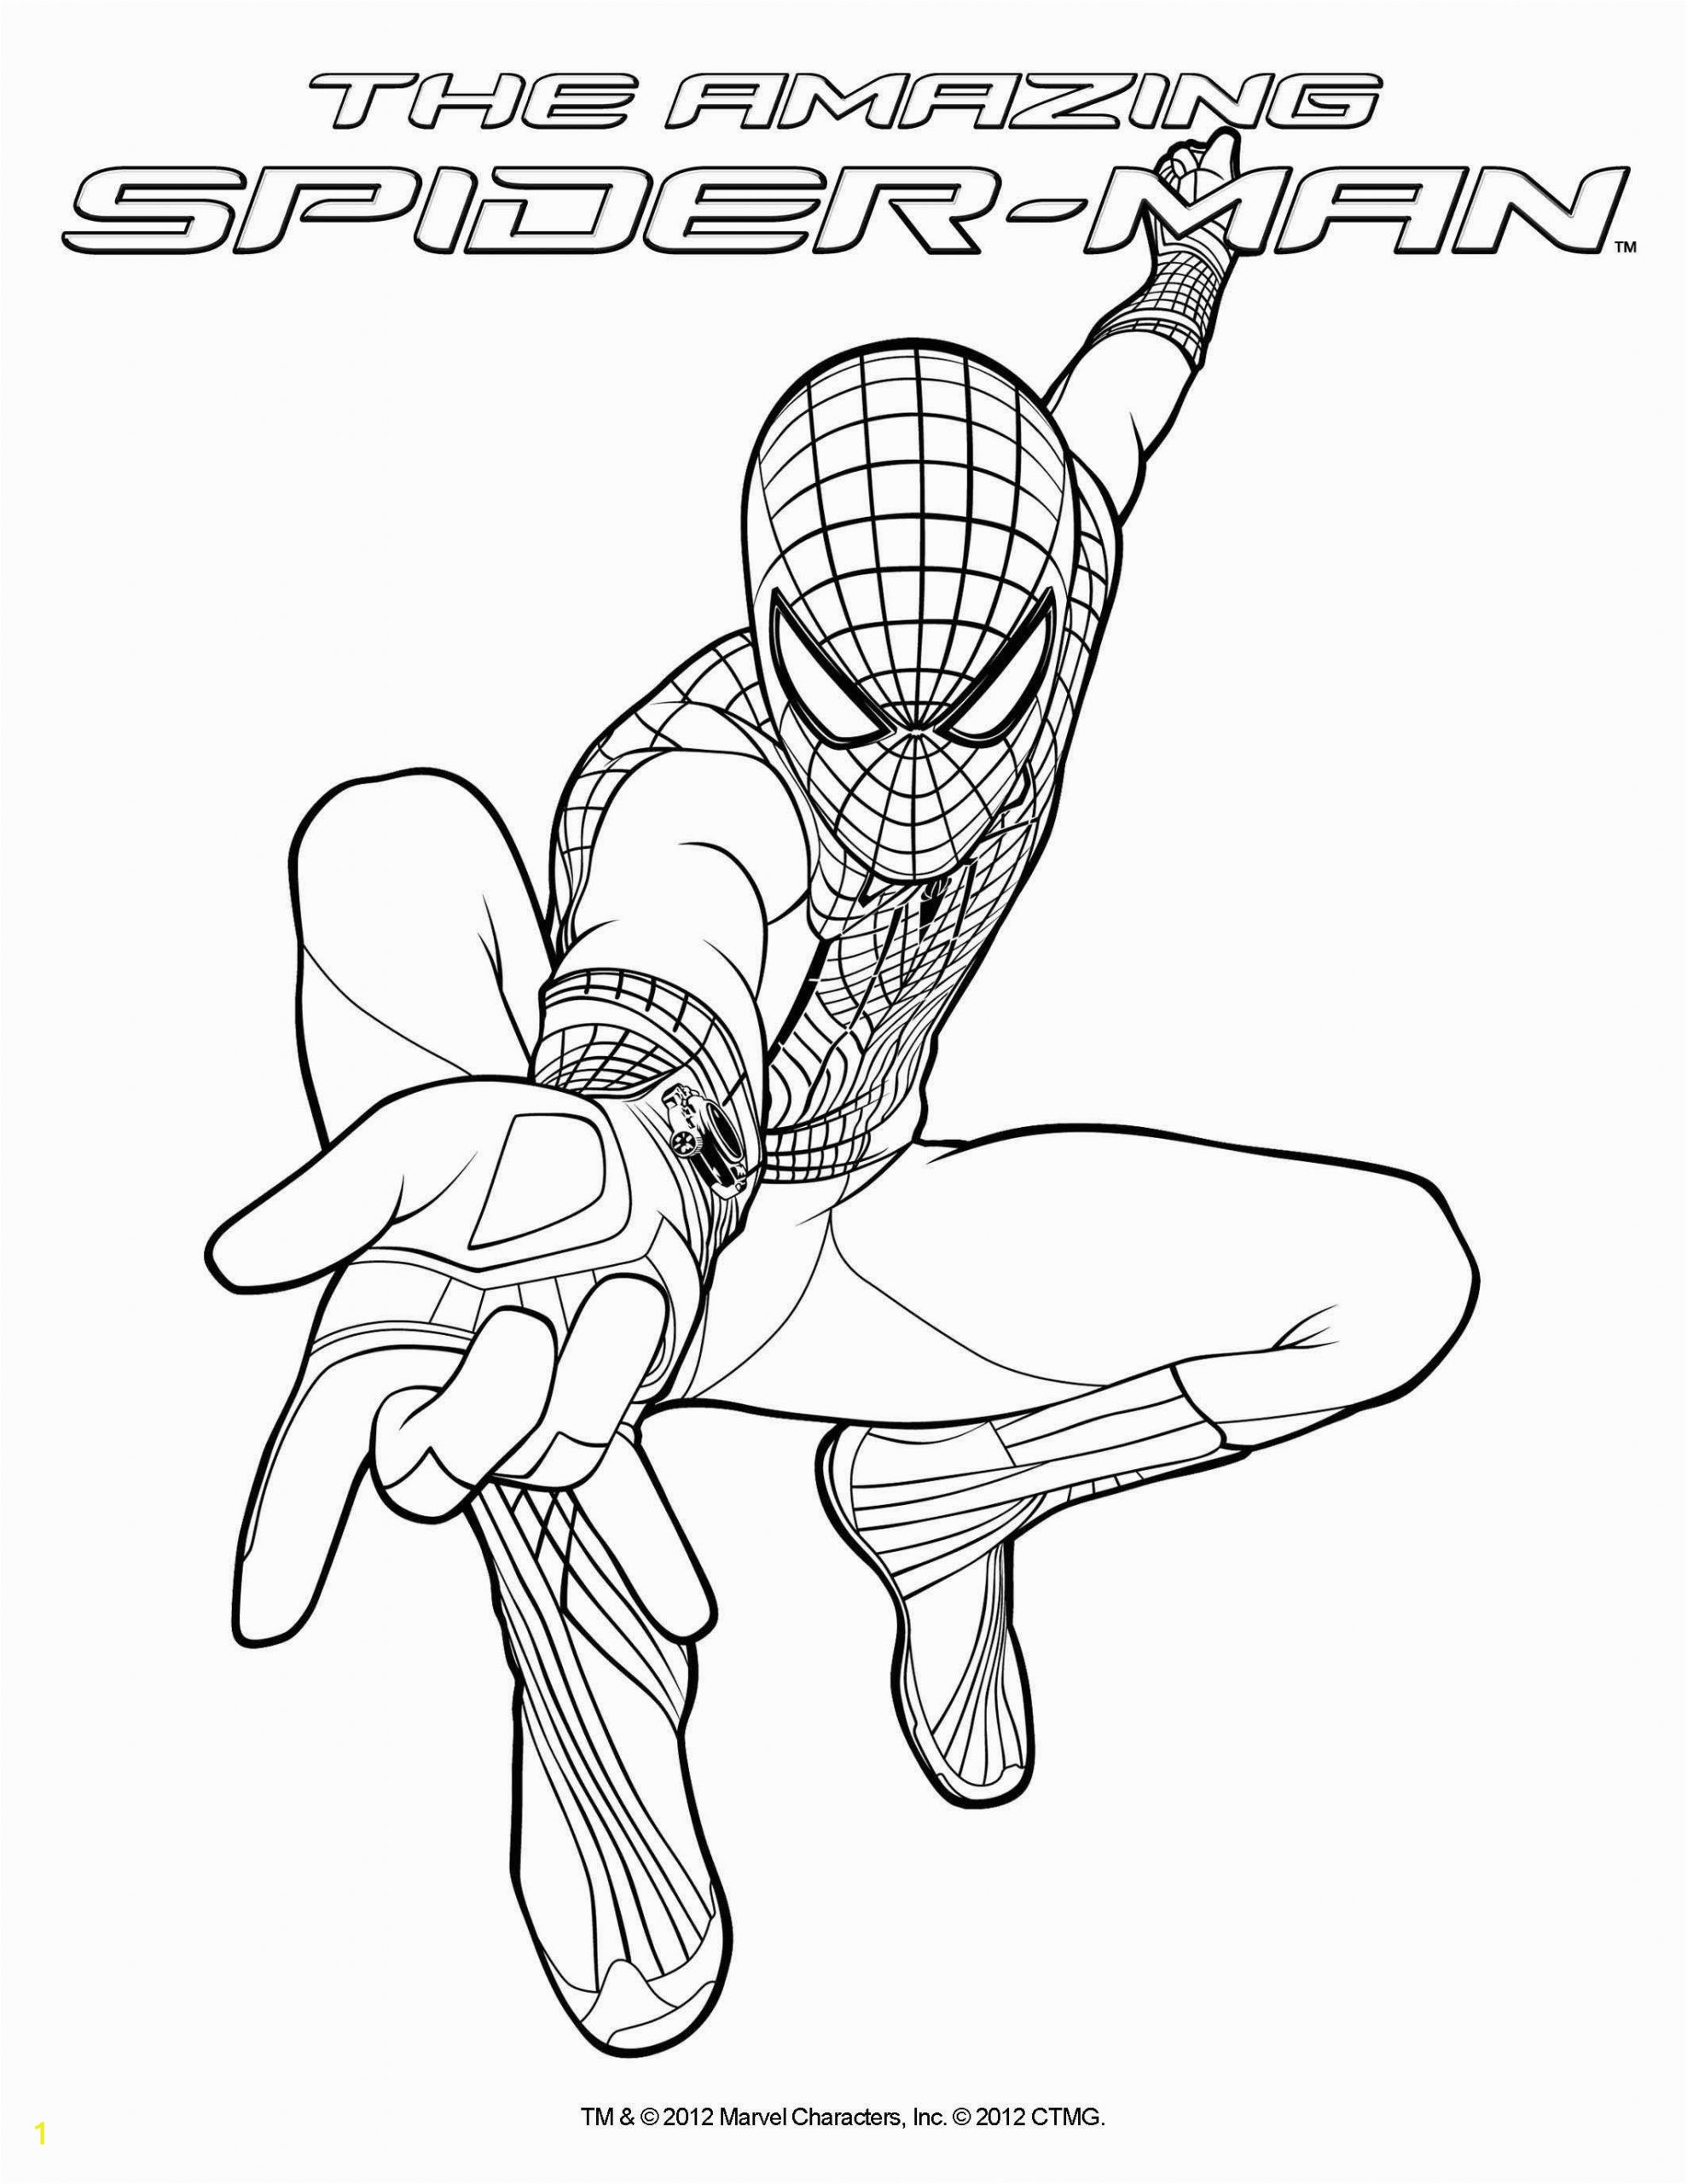 Homecoming Spiderman Coloring Pages Amazing Spider Man 2012